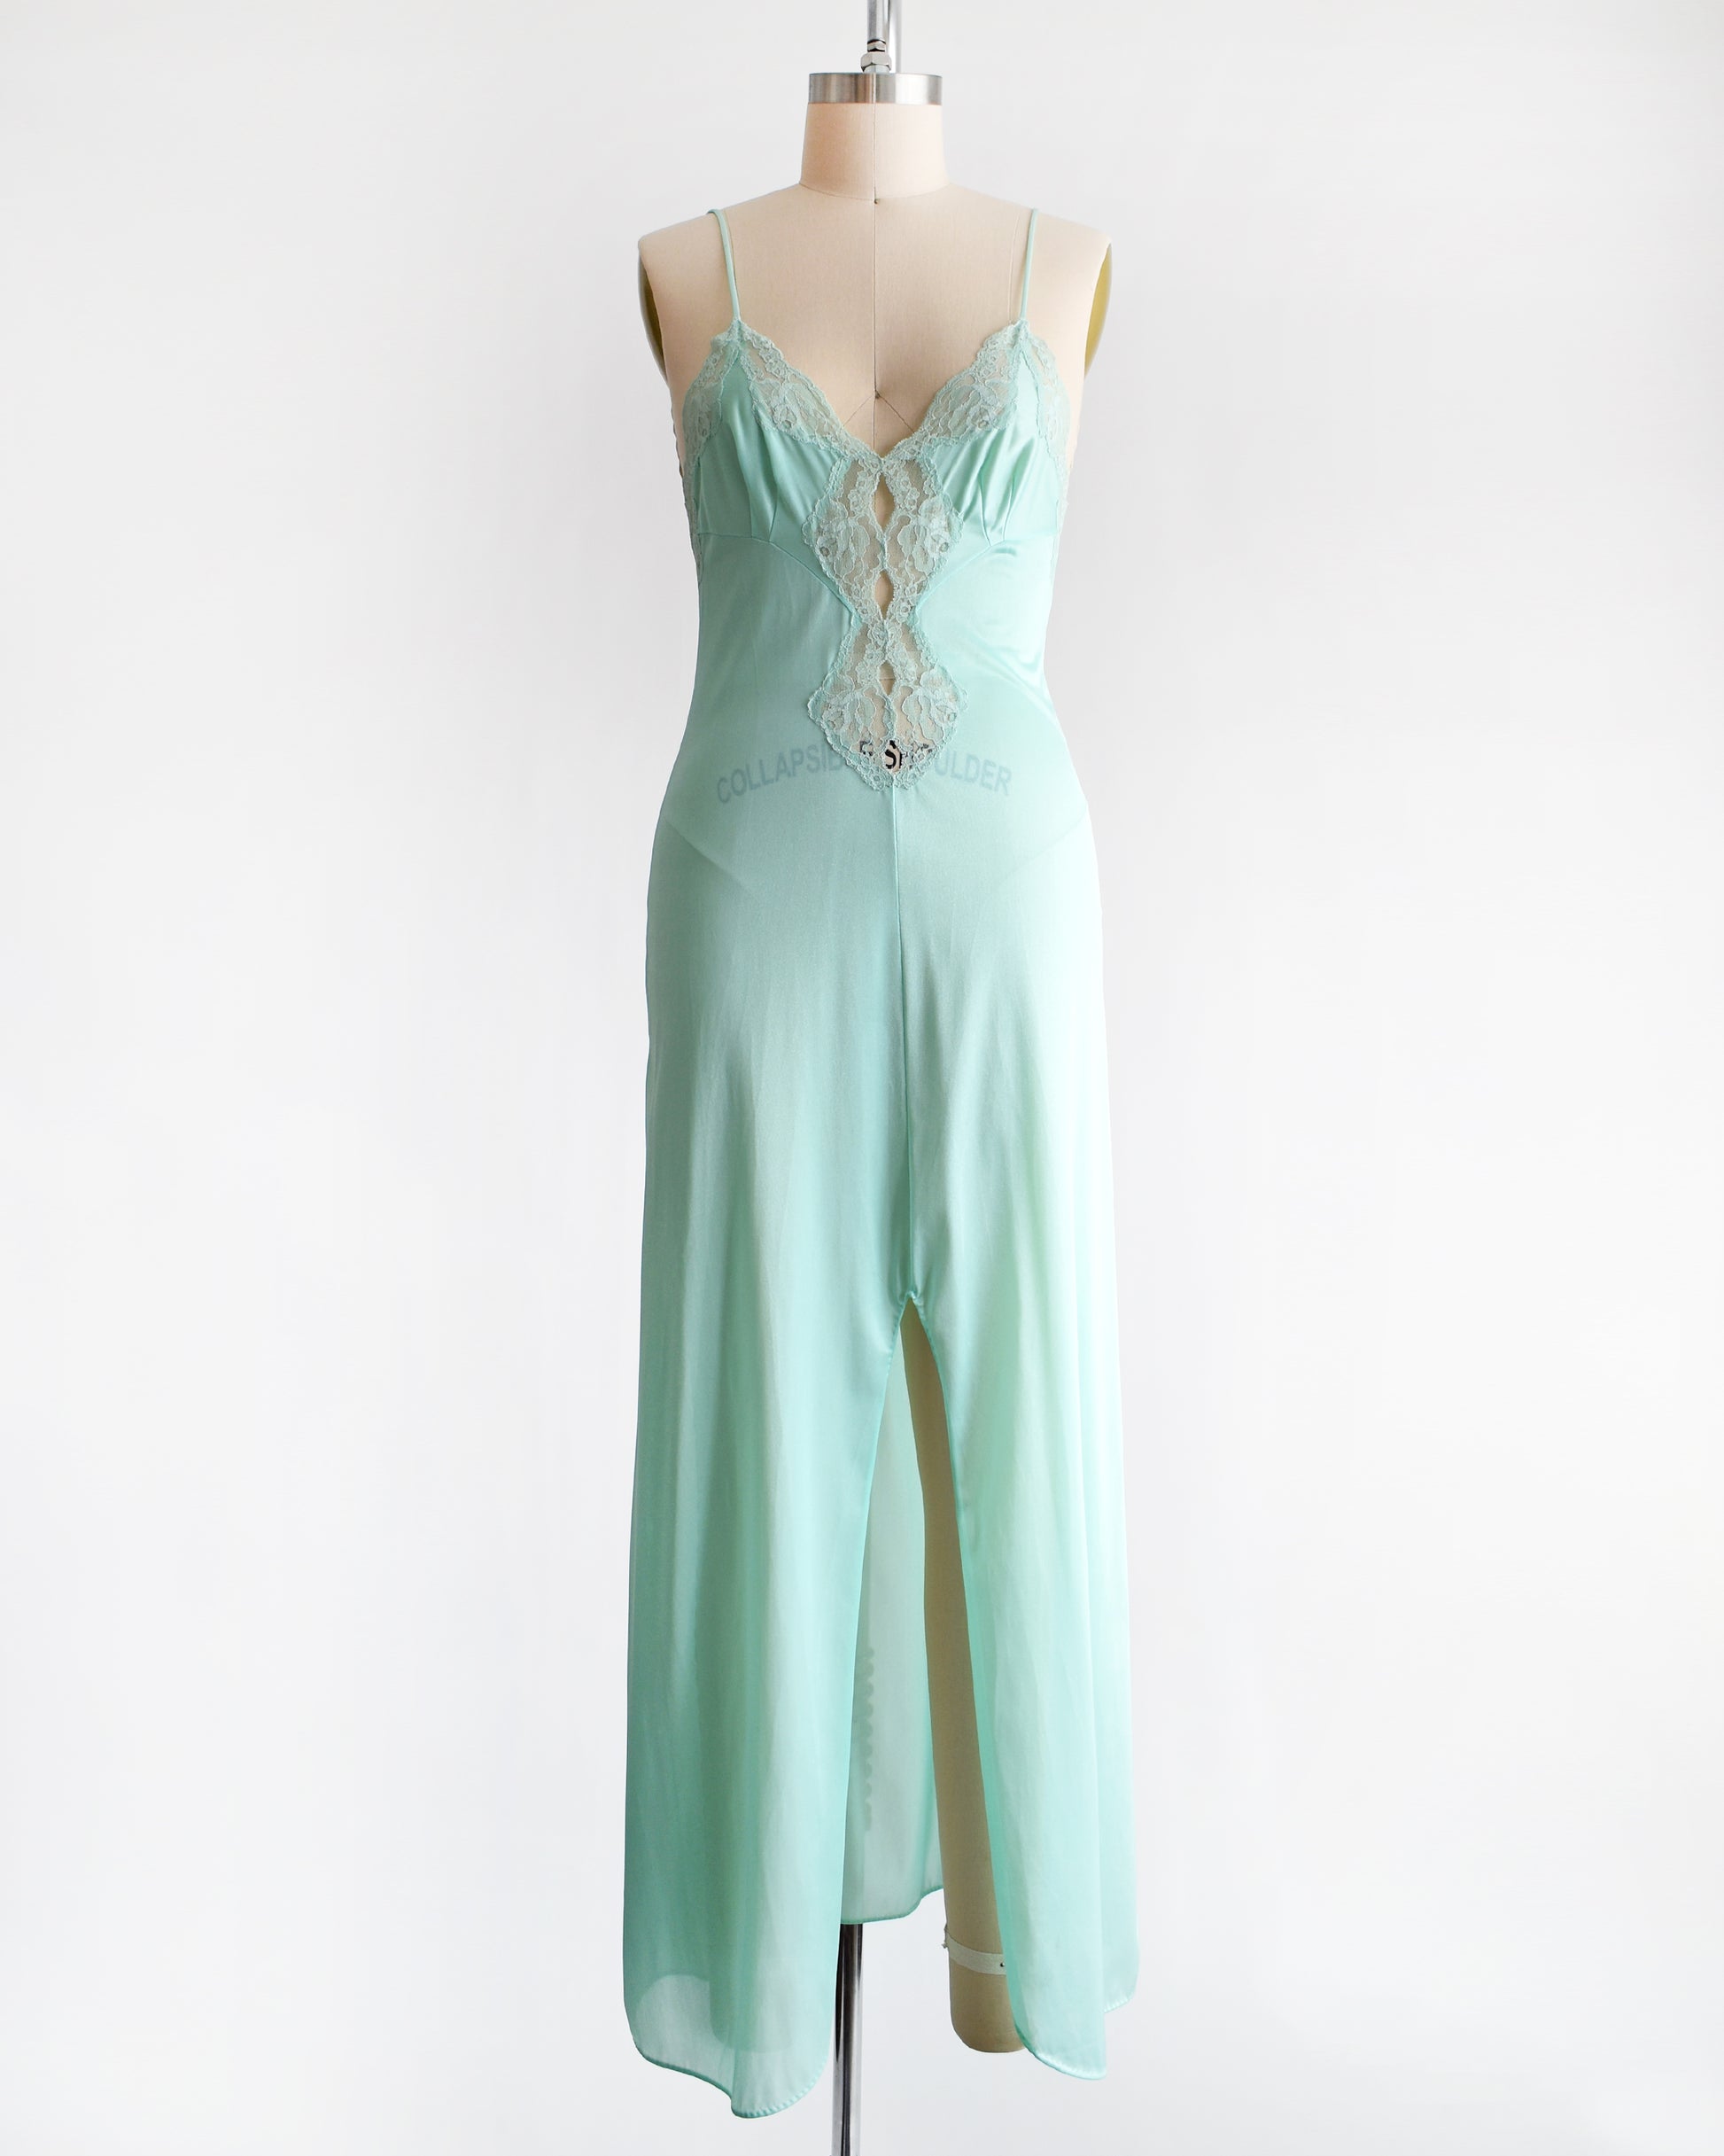 A vintage 1970s mint green lace nightgown